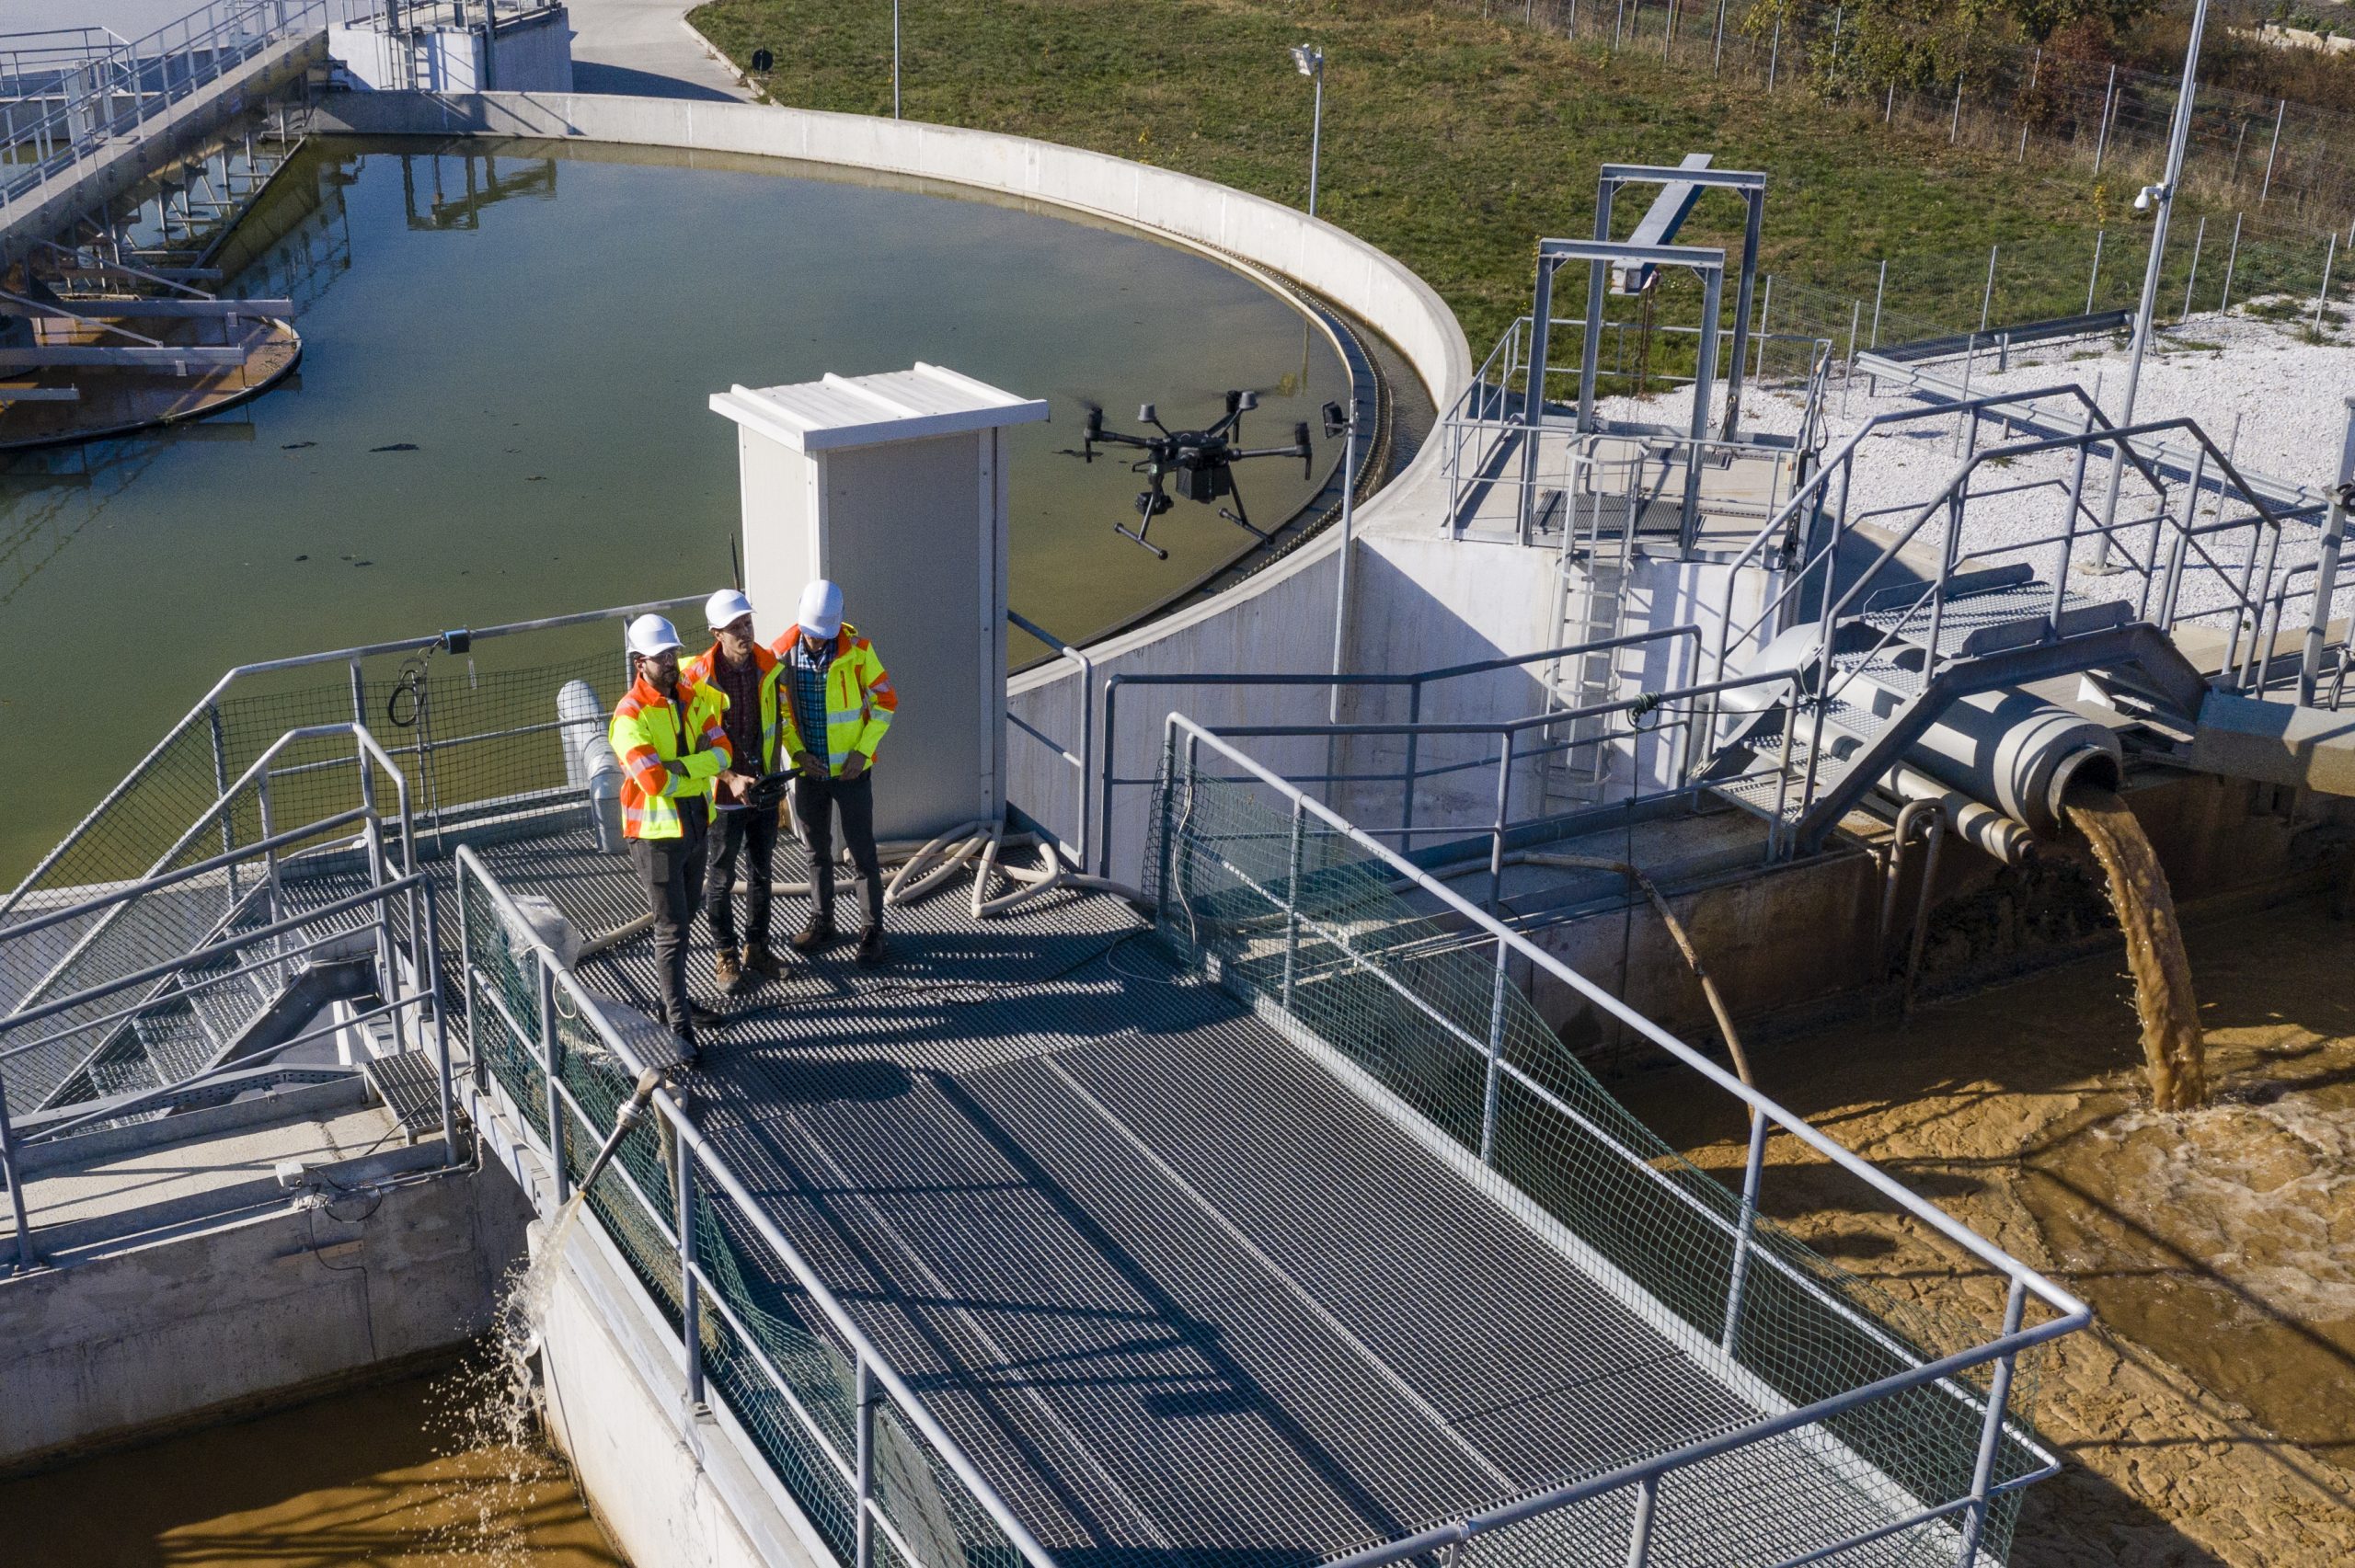 Engineers assesing waste water treatment plant with industrial drone